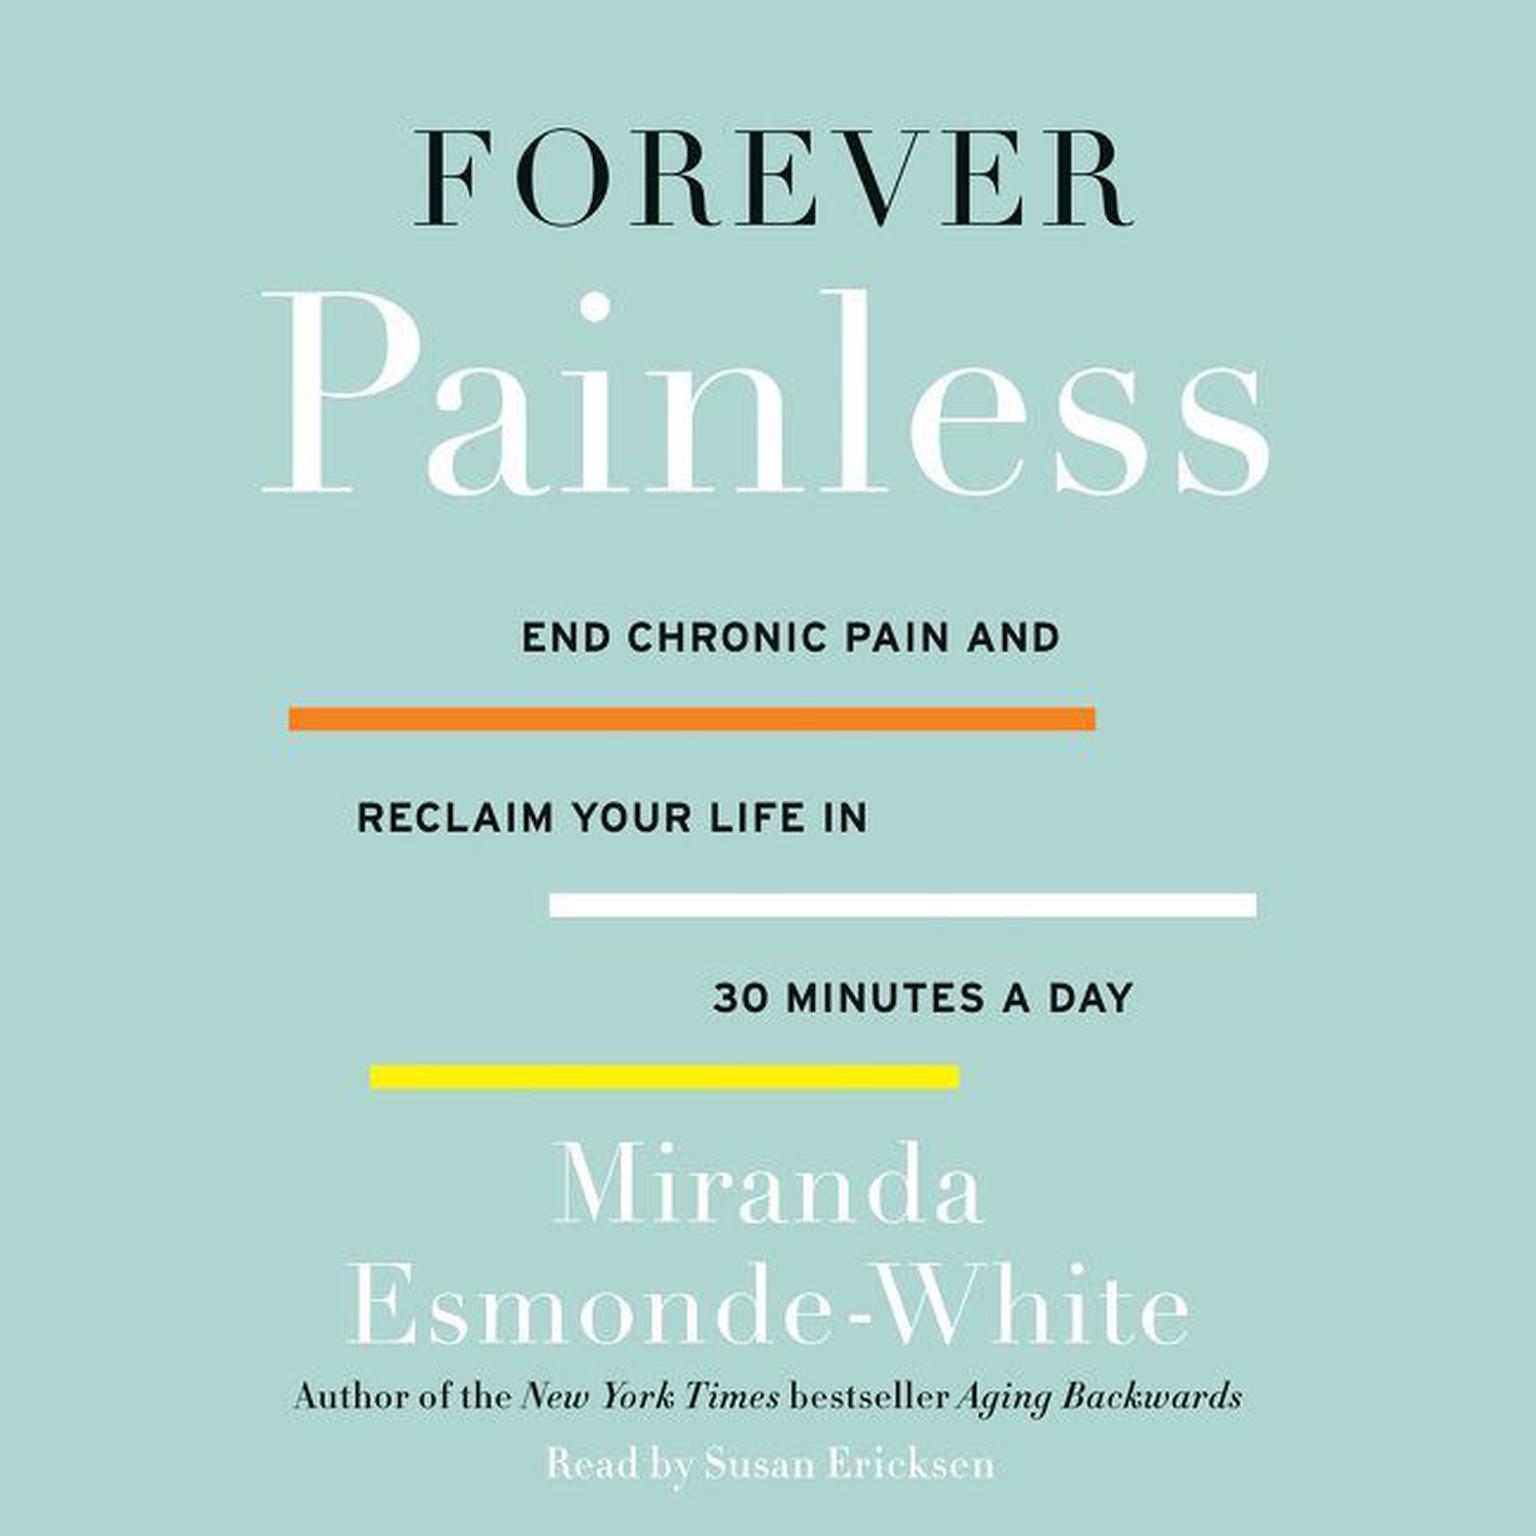 Forever Painless: End Chronic Pain and Reclaim Your Life in 30 Minutes a Day Audiobook, by Miranda Esmonde-White